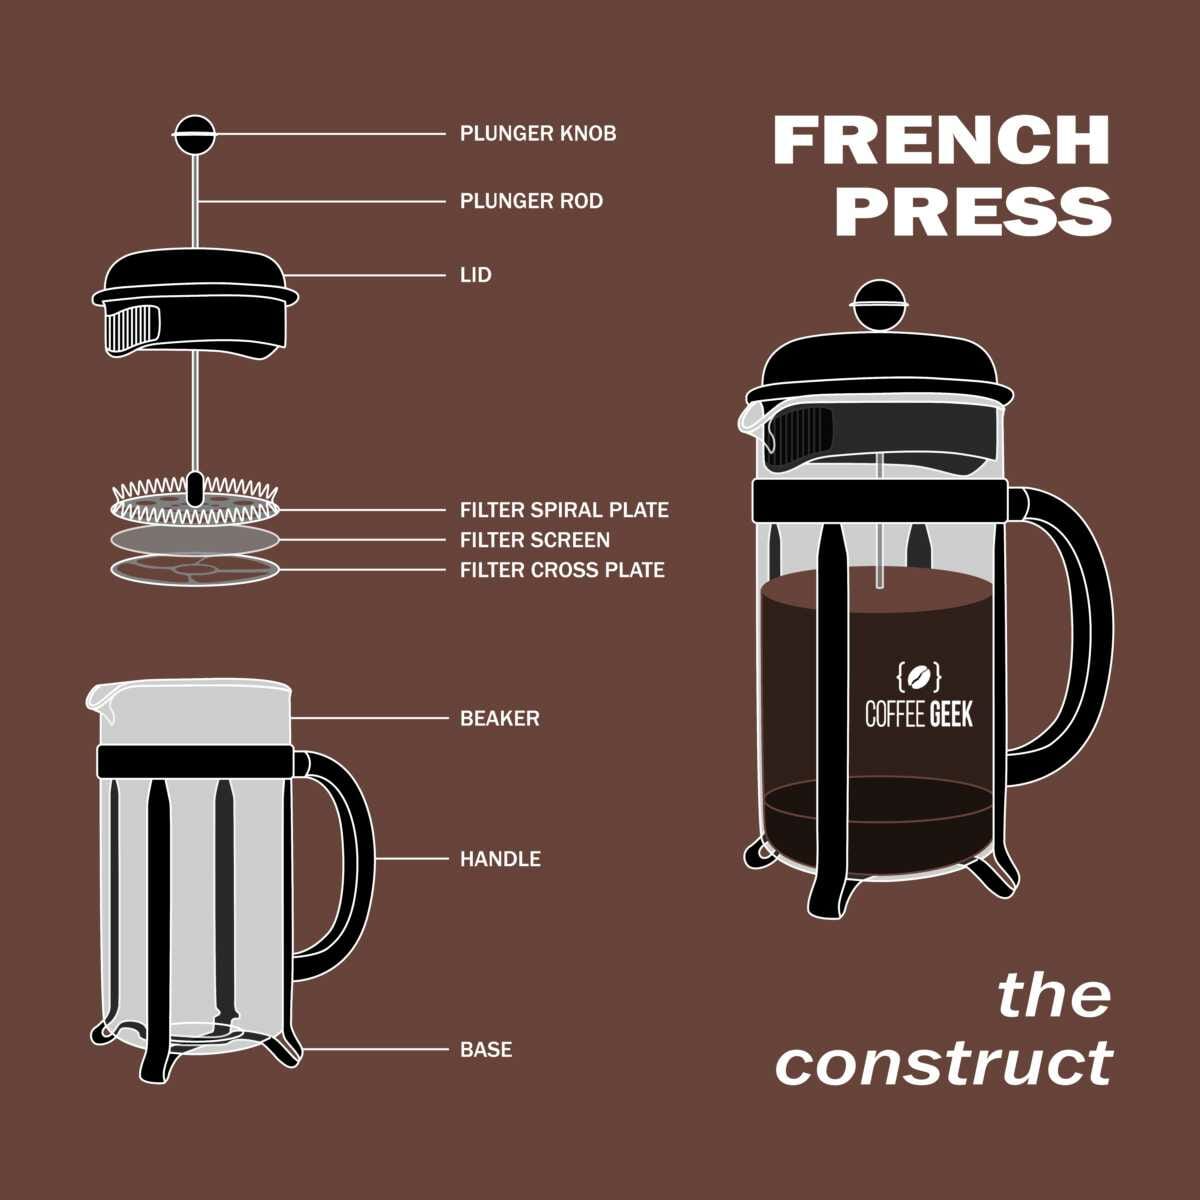 https://coffeegeek.tv/wp-content/uploads/2021/04/what-is-a-french-press.jpg